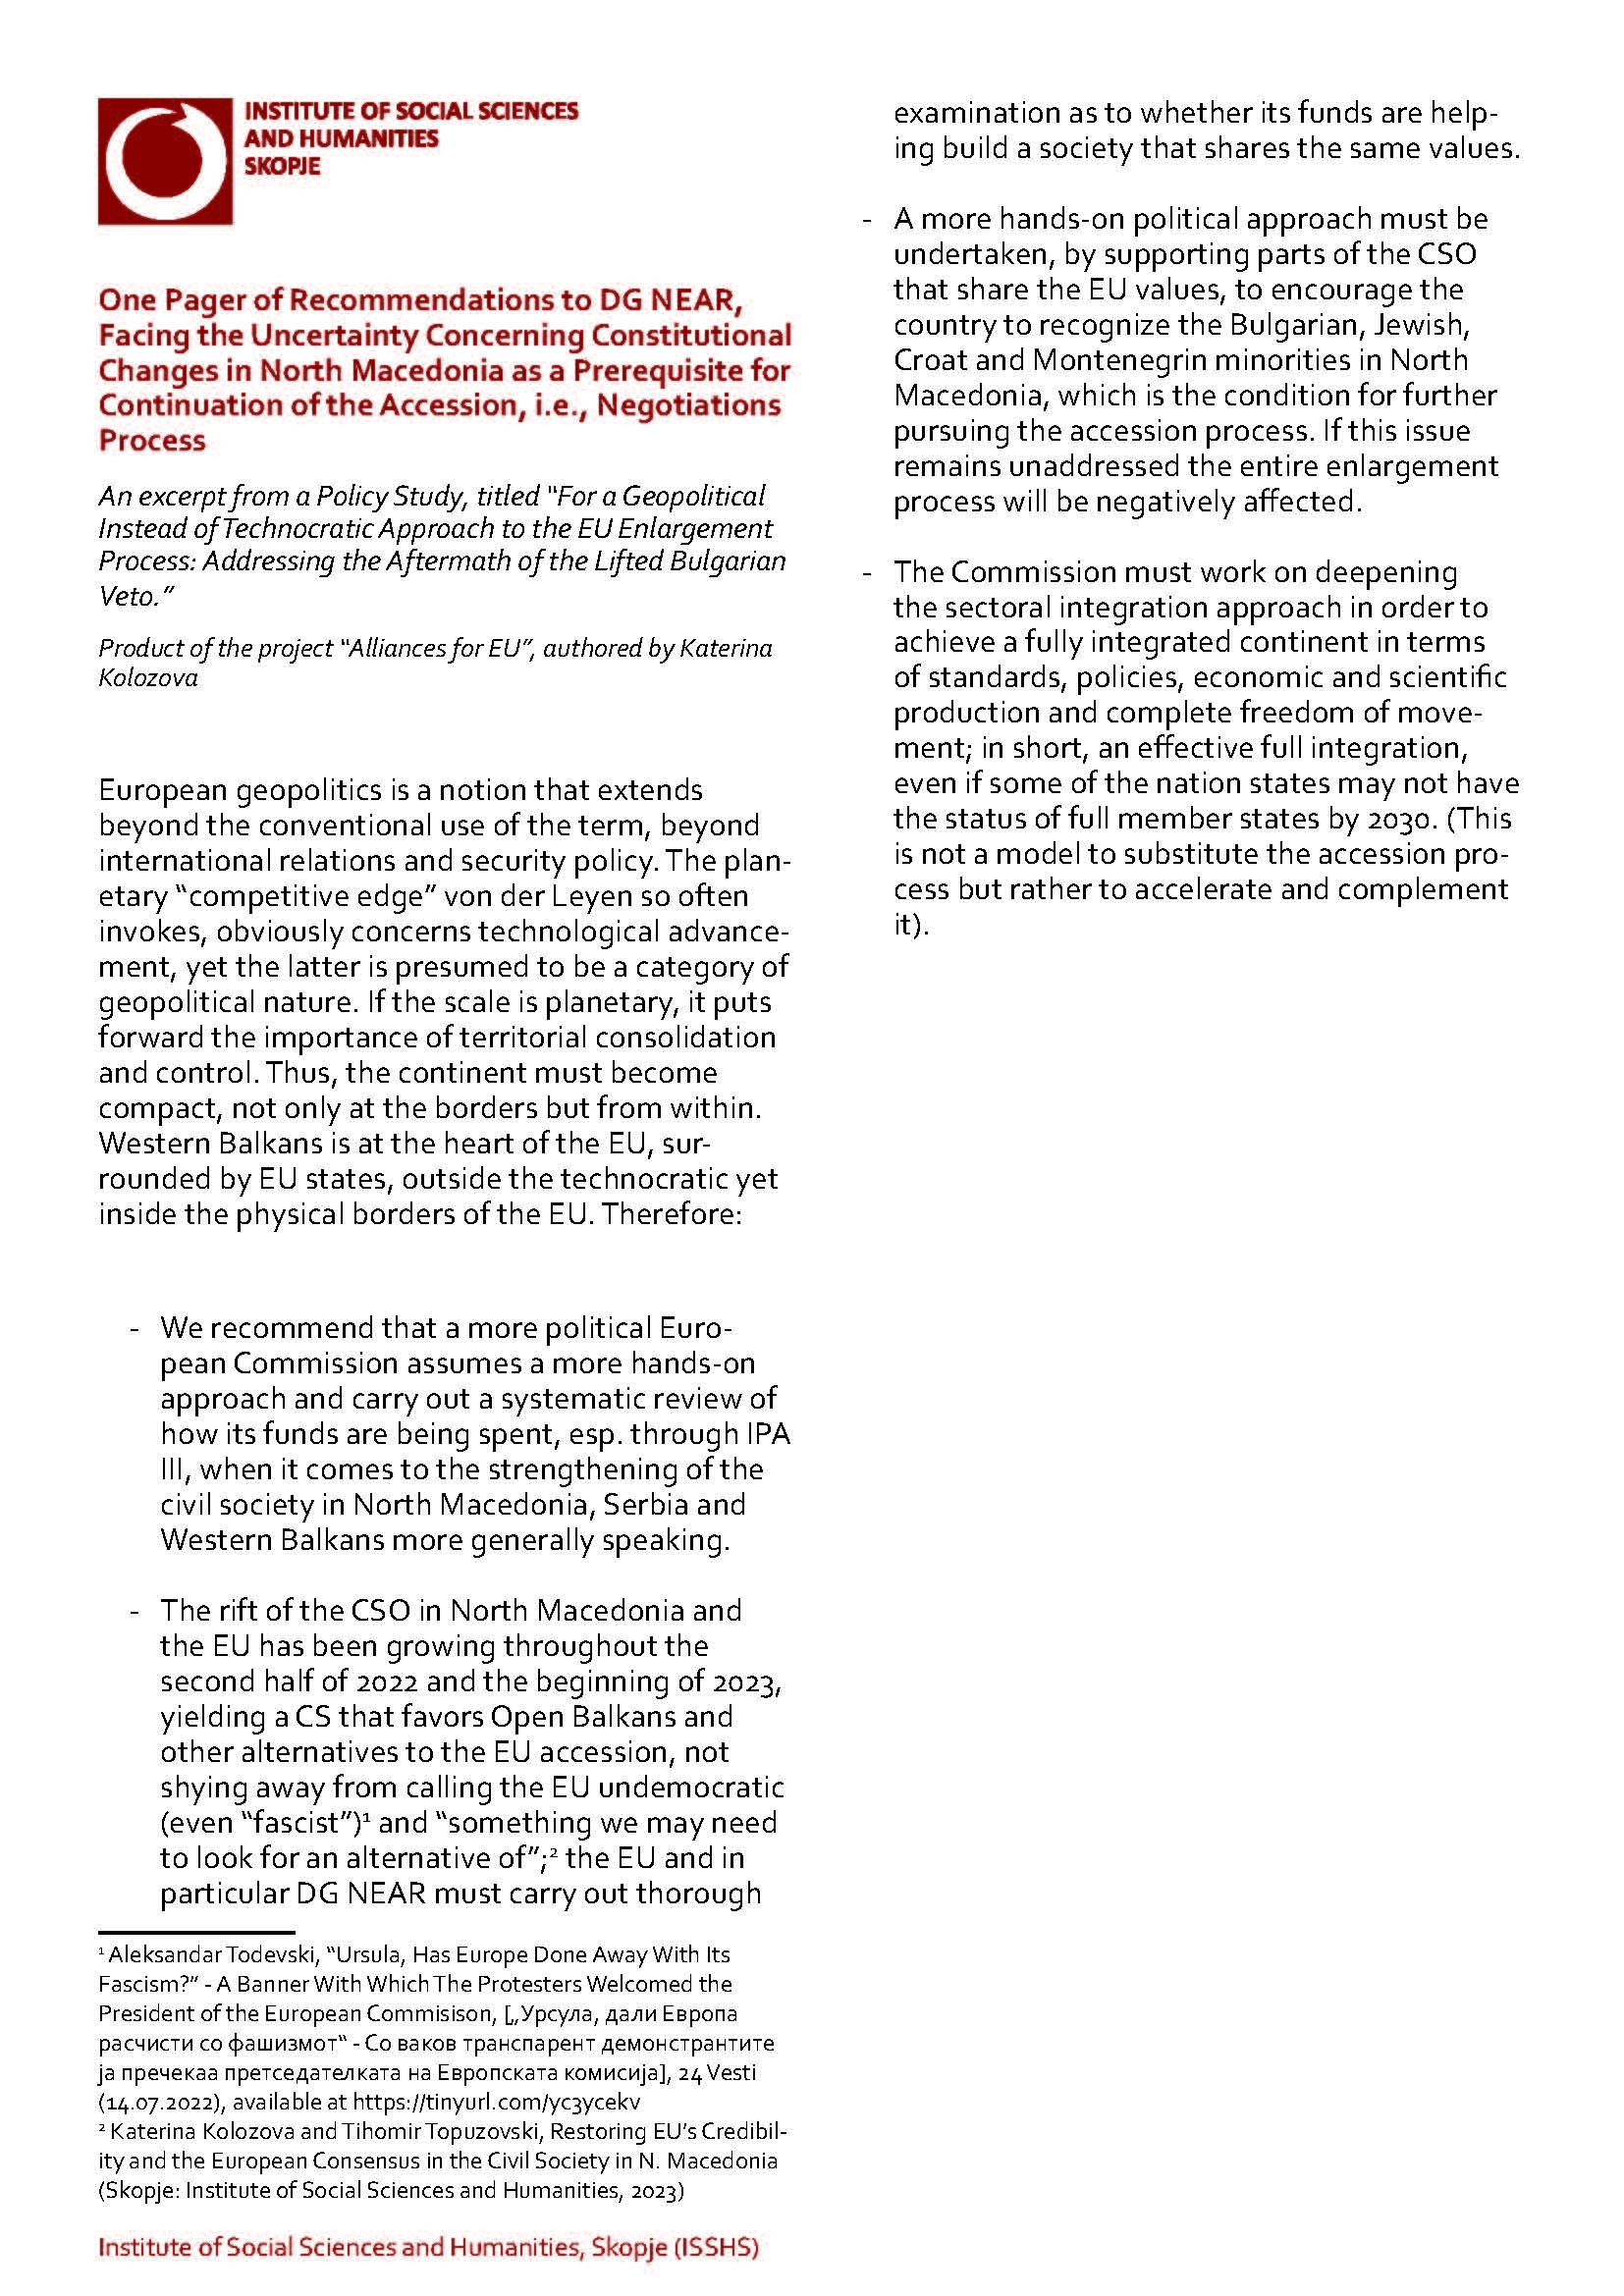 ONE PAGER OF RECOMMENDATIONS TO DG NEAR, FACING THE UNCERTAINTY CONCERNING CONSTITUTIONAL CHANGES IN NORTH MACEDONIA AS A PREREQUISITE FOR CONTINUATION OF THE ACCESSION, I.E., NEGOTIATIONS PROCESS Cover Image